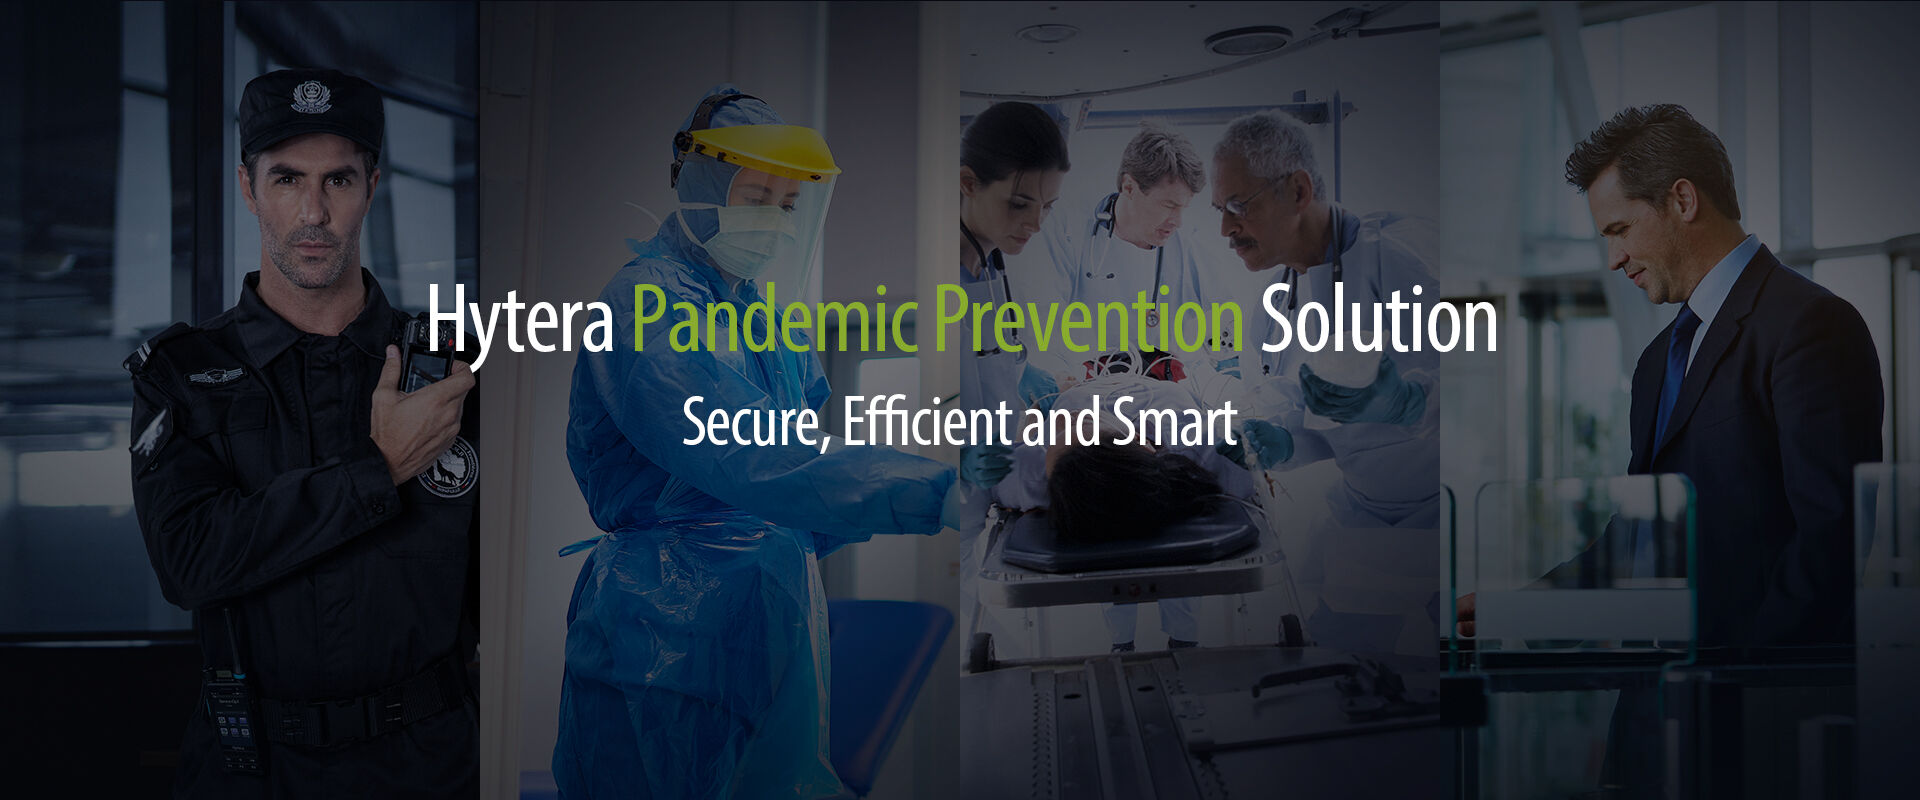 Hytera Anti-Pandemic Solutions Help Contain the Virus Crisis